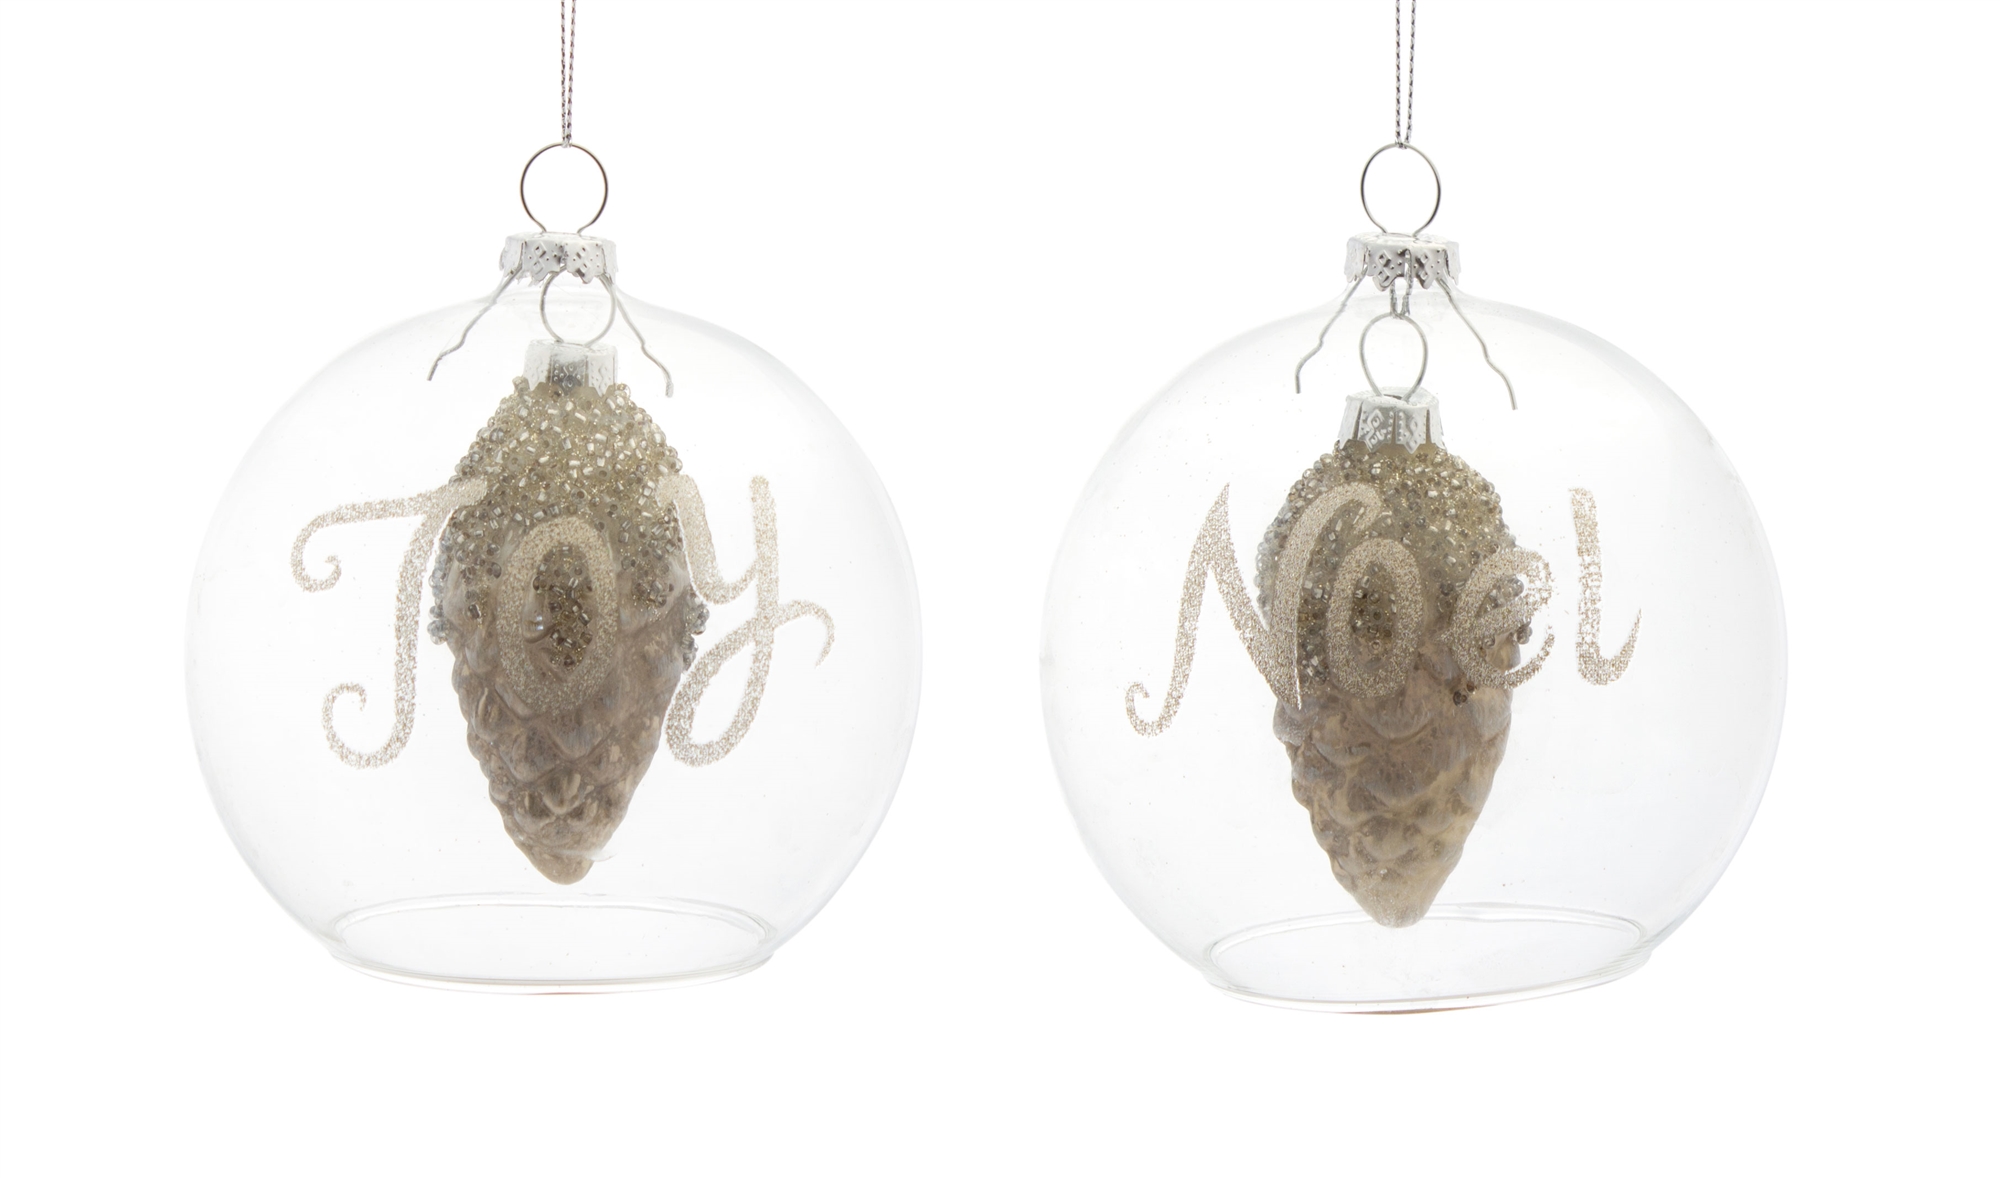 Cone in Ball Ornament (Set of 6) 4.25"H Glass